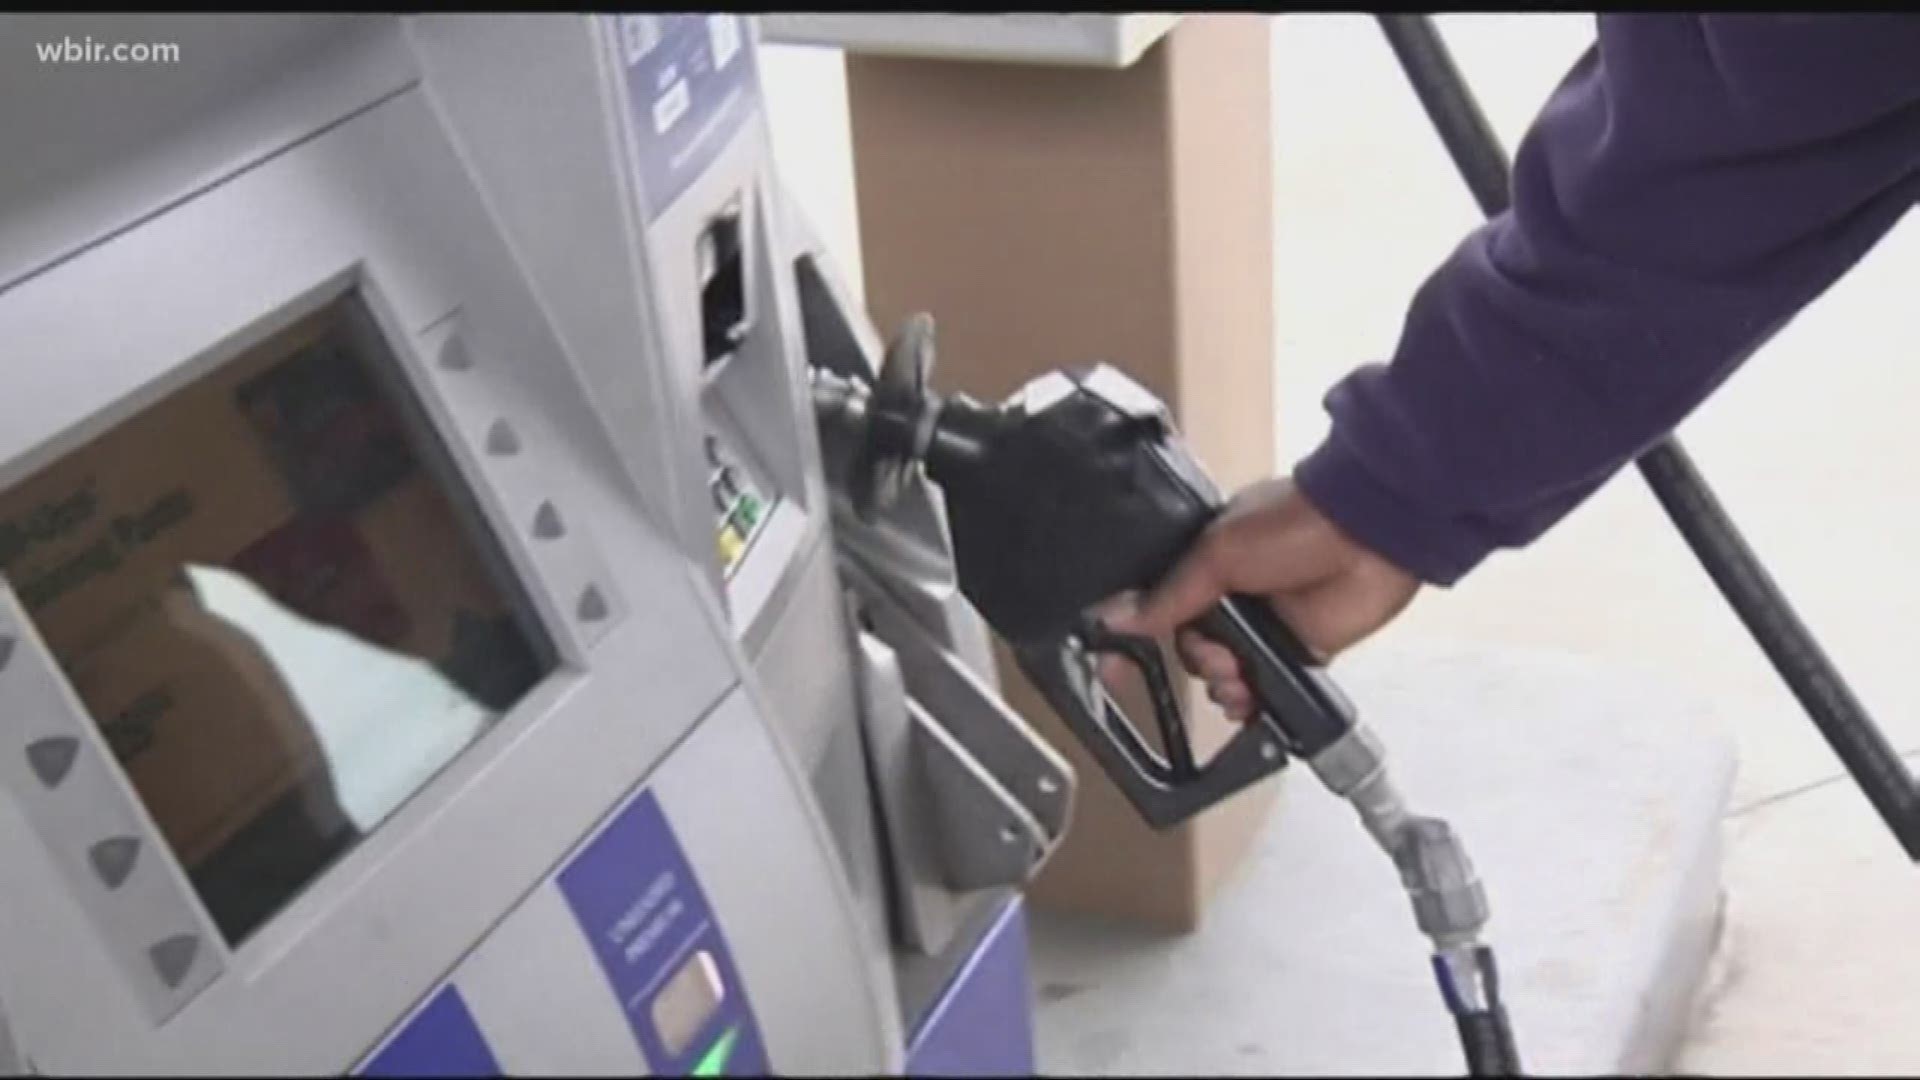 We've been enjoying low gas prices this January, but the cost will likely start going up.